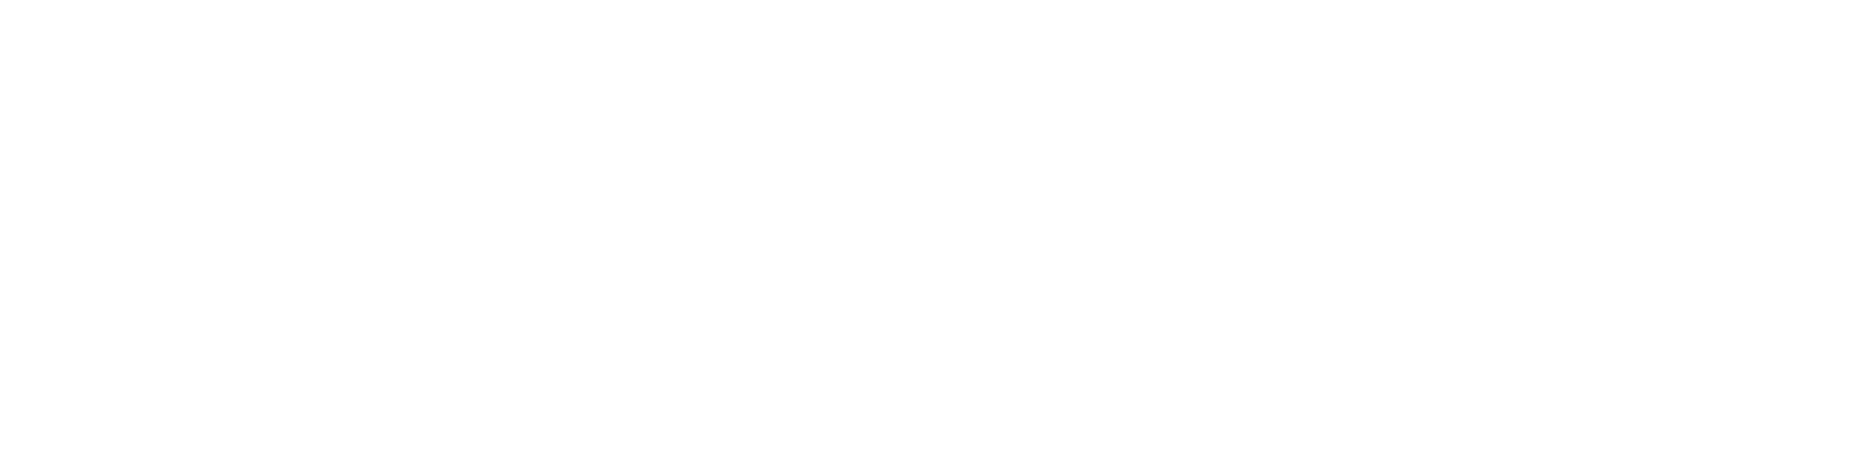 Tapp Funeral Home Logo